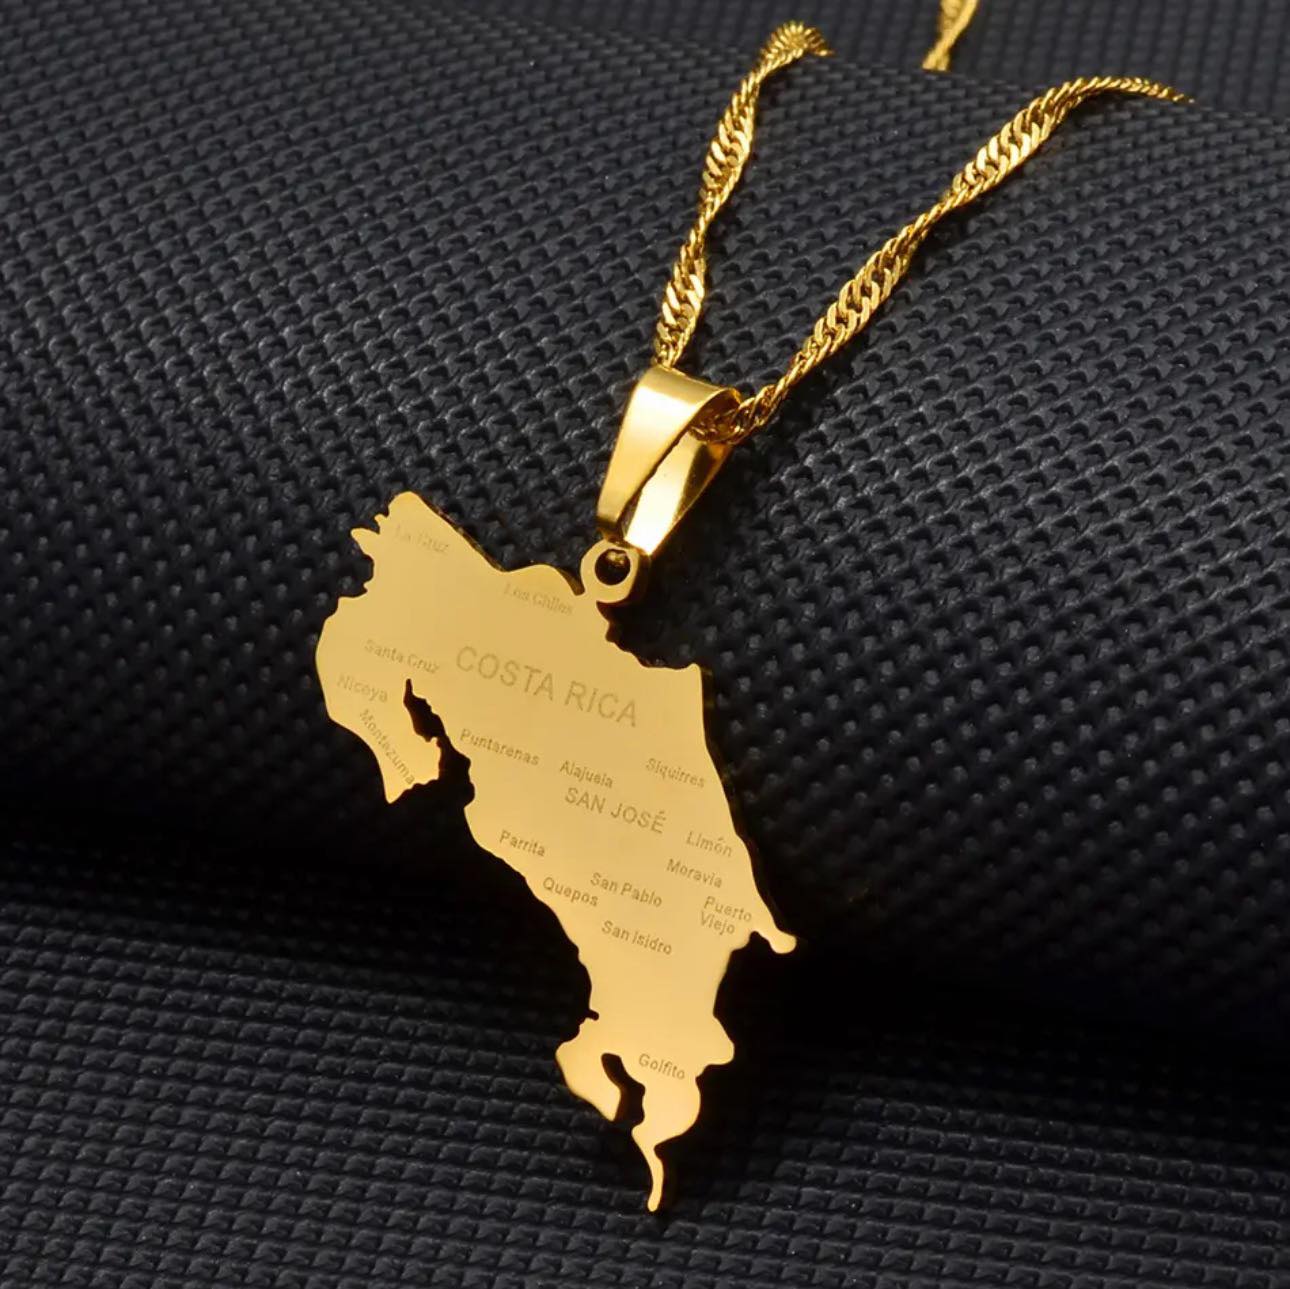 Costa Rica Map & Cities Necklace